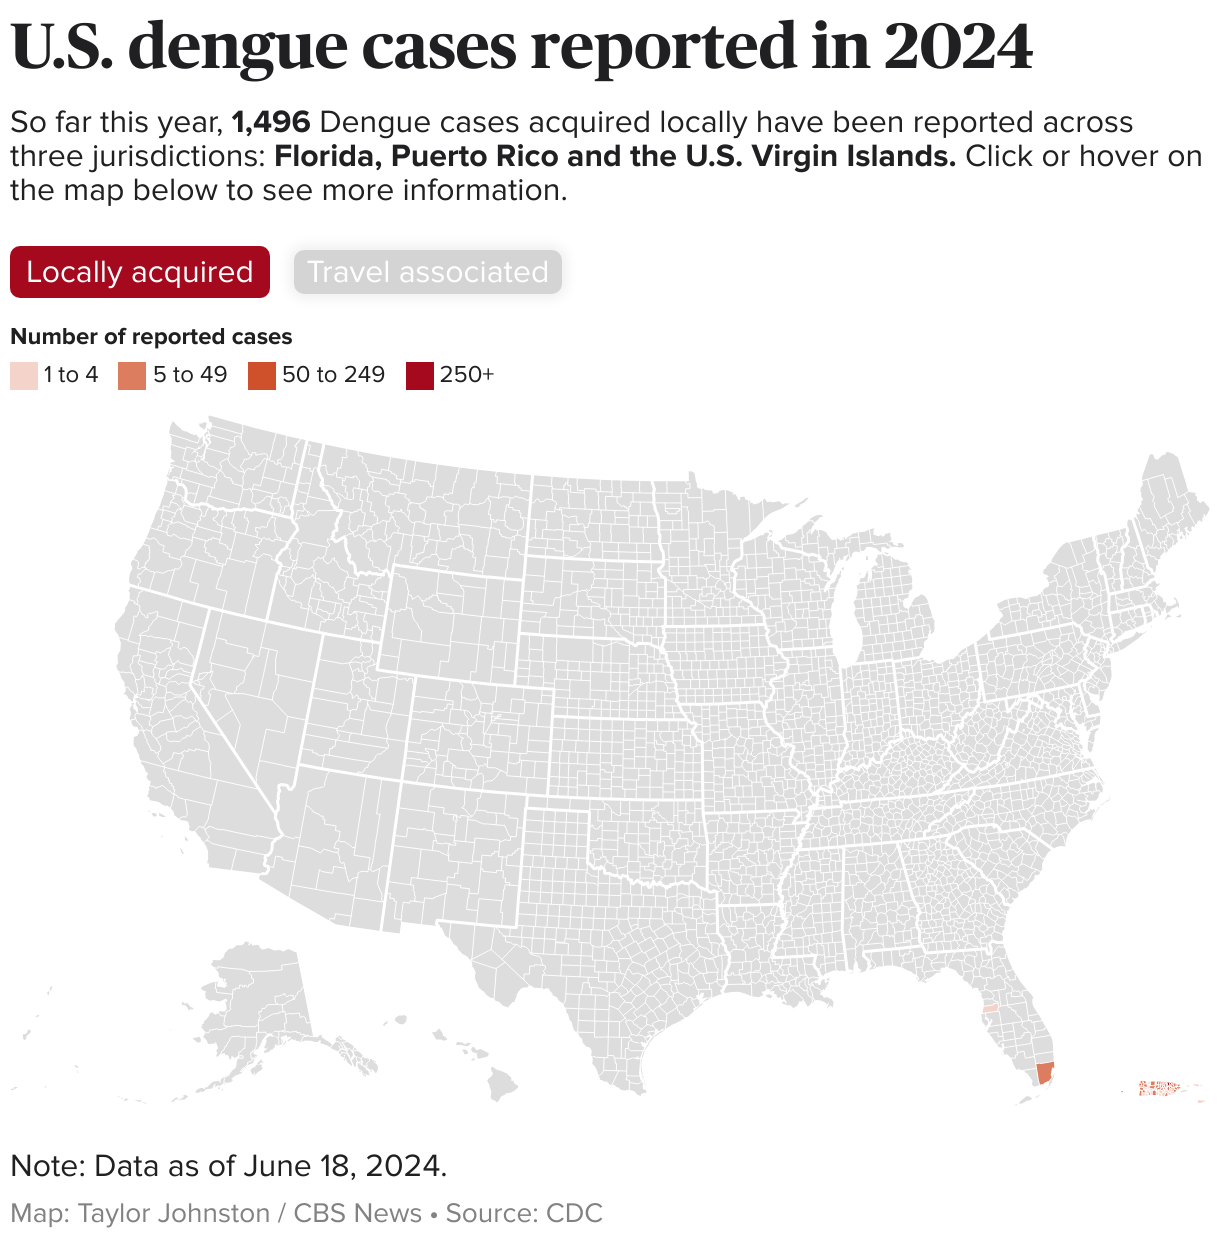 A map of the United States showing where dengue cases have occurred in the country so far in 2024.